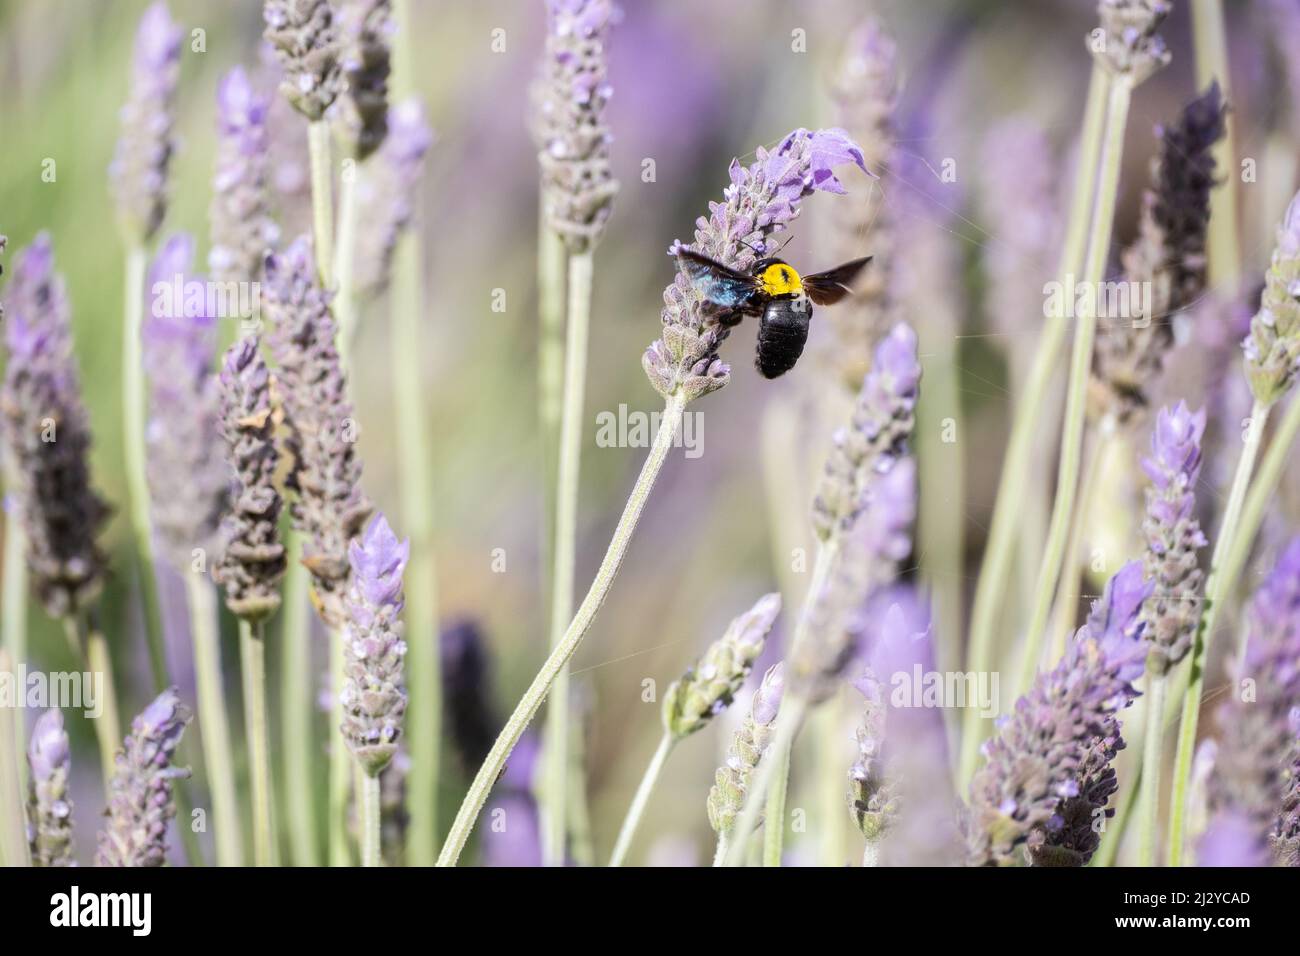 Carpenter Bee (Xylocopa violacea) on Lavender plant, flower in The Canary Islands, Spain. Stock Photo